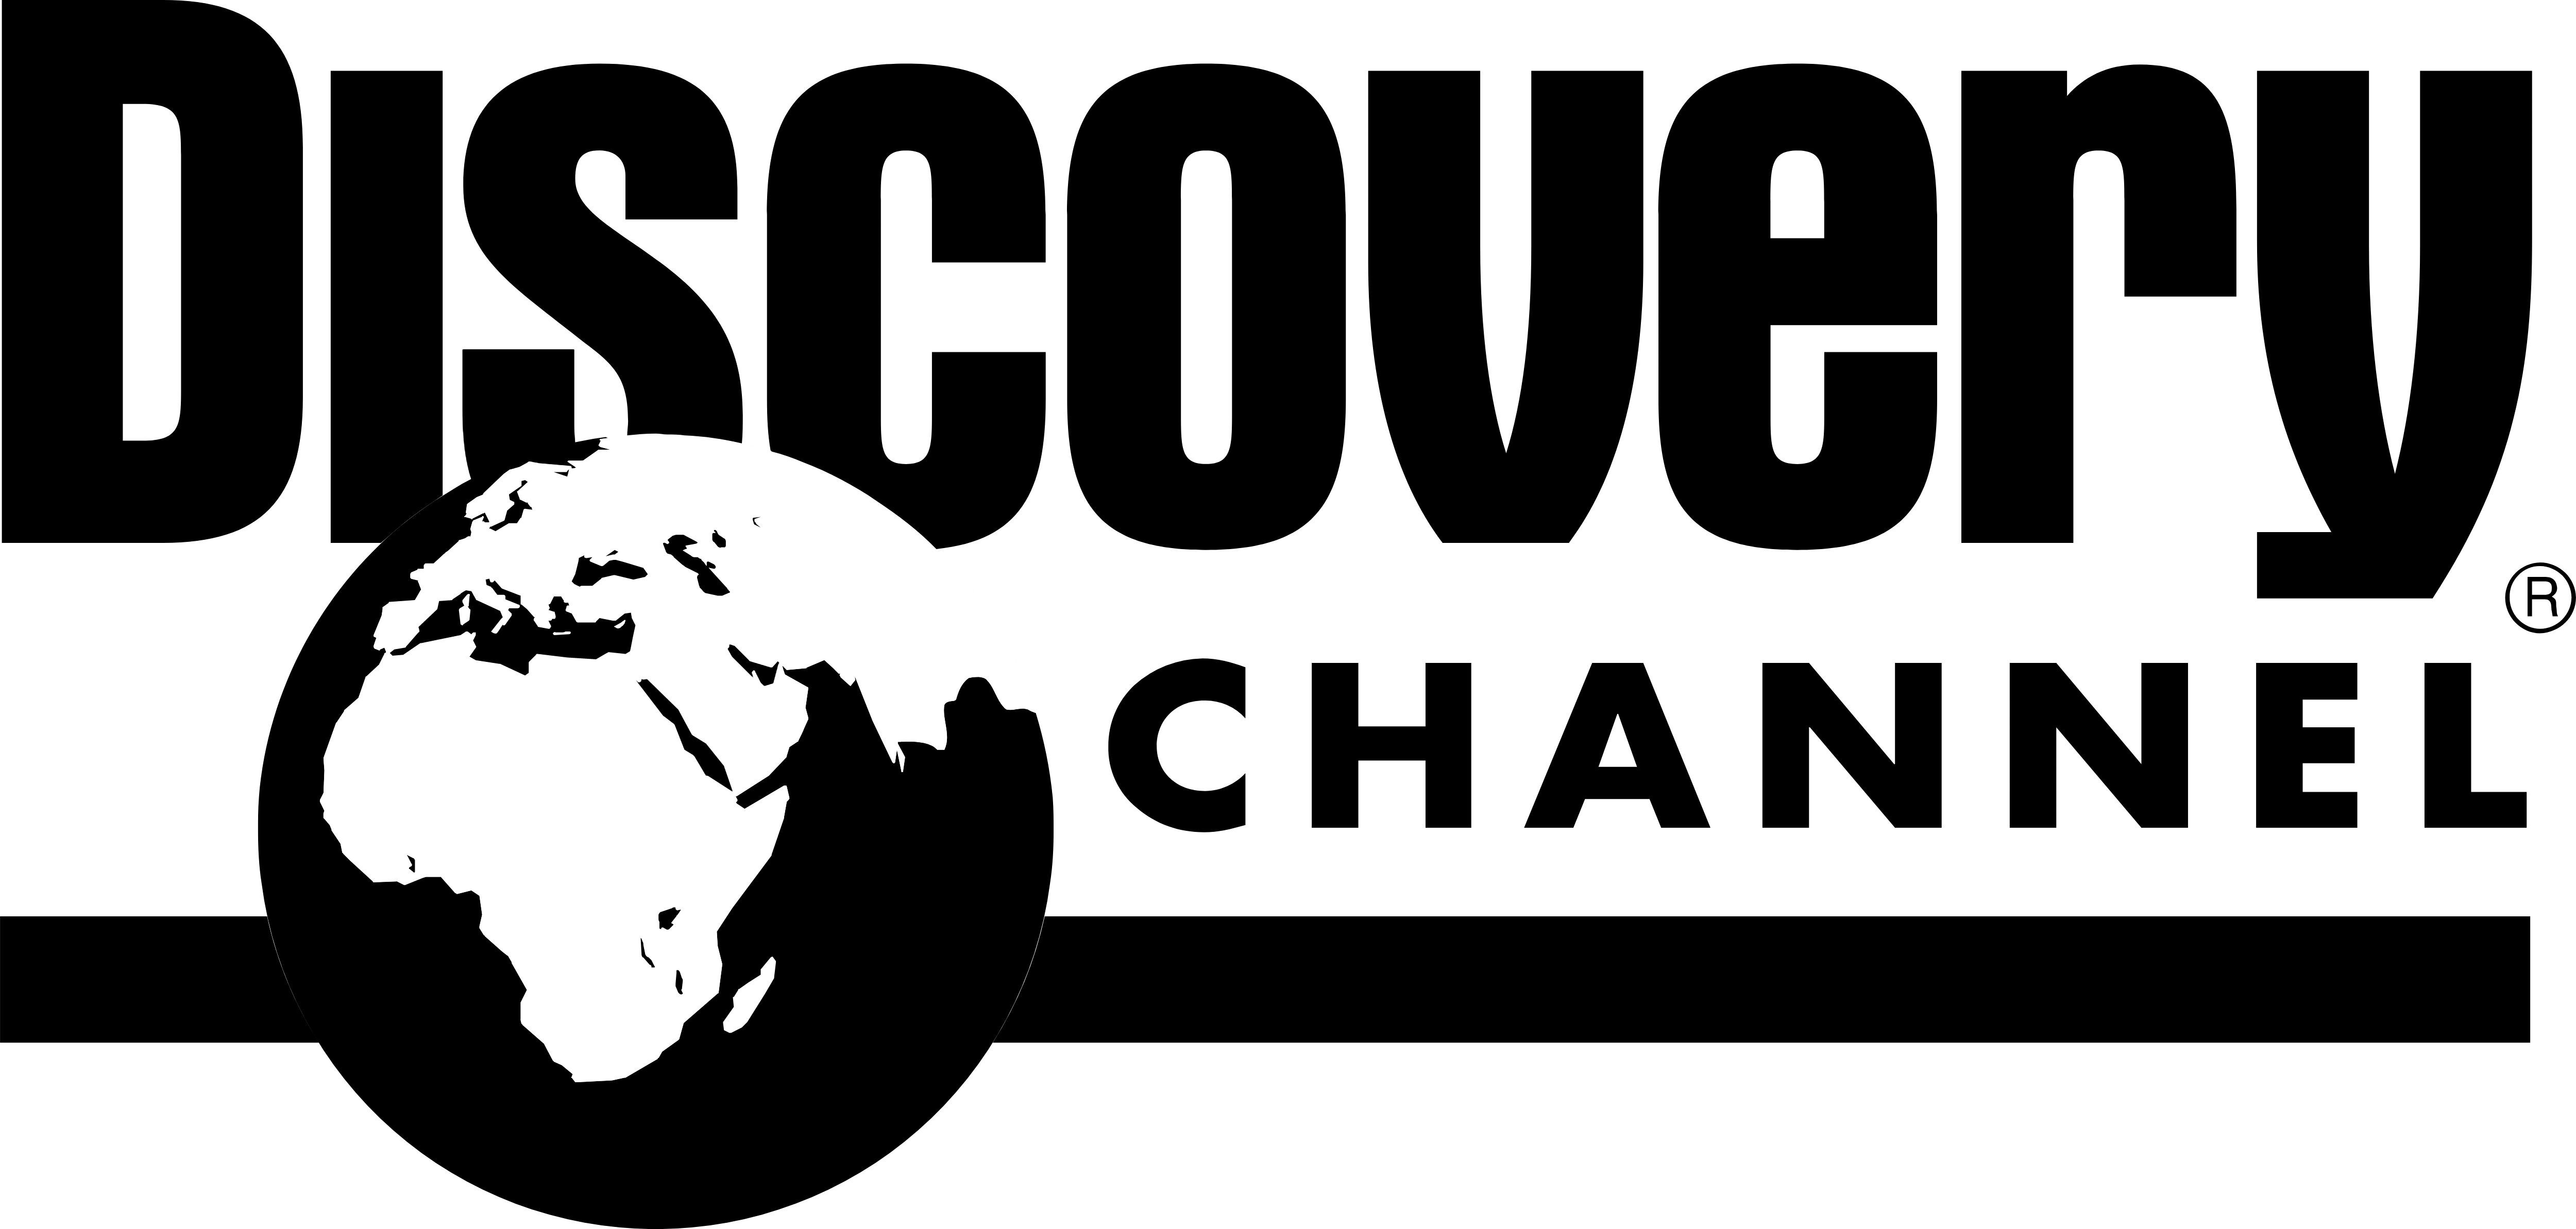 Channel Logo - Discovery Channel – Logos Download